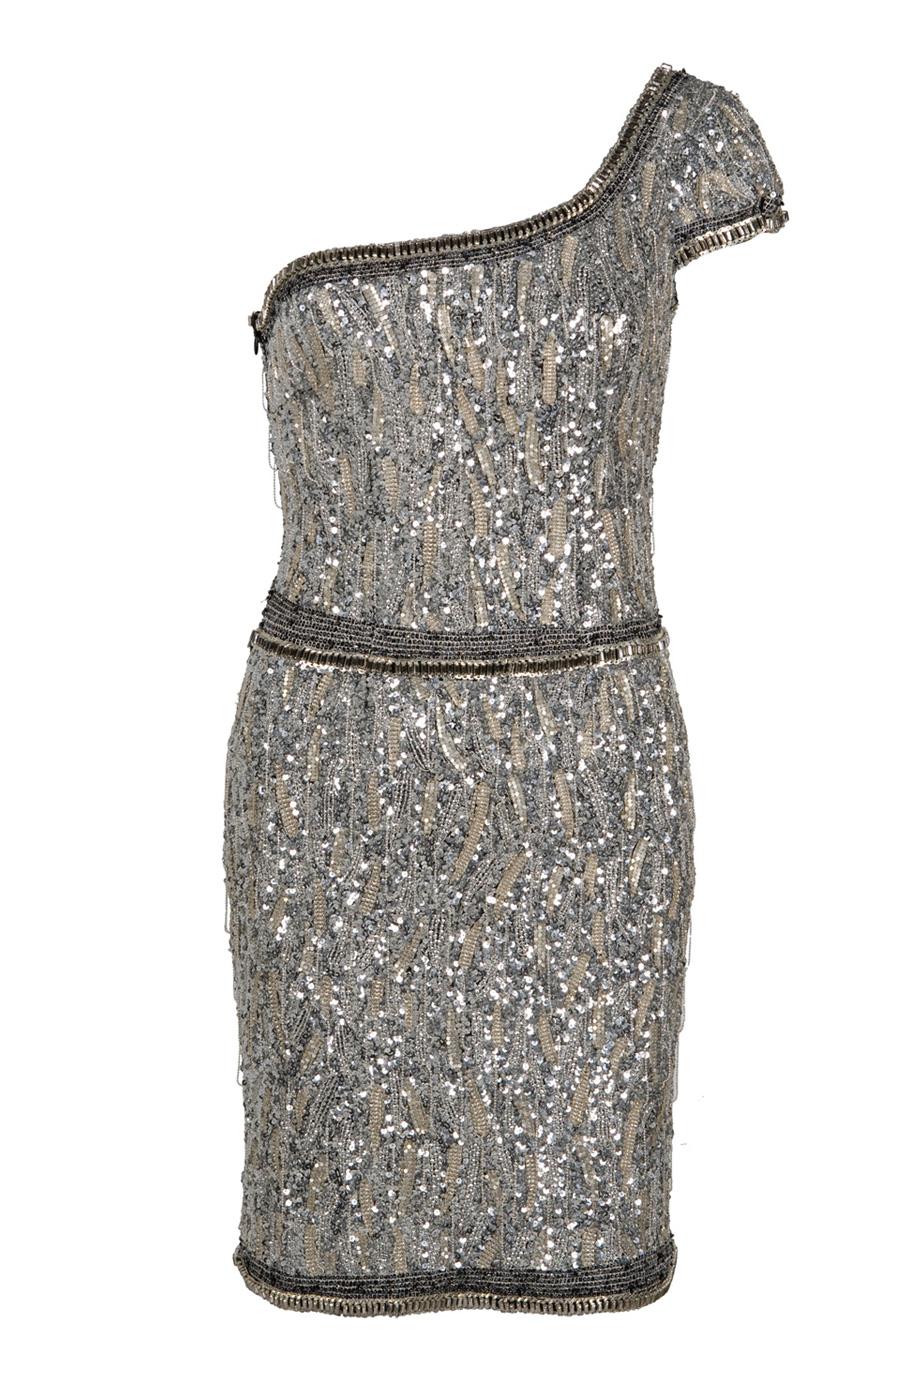 Collette Dinnigan Beaded One Shoulder Dress. in Silver | Lyst